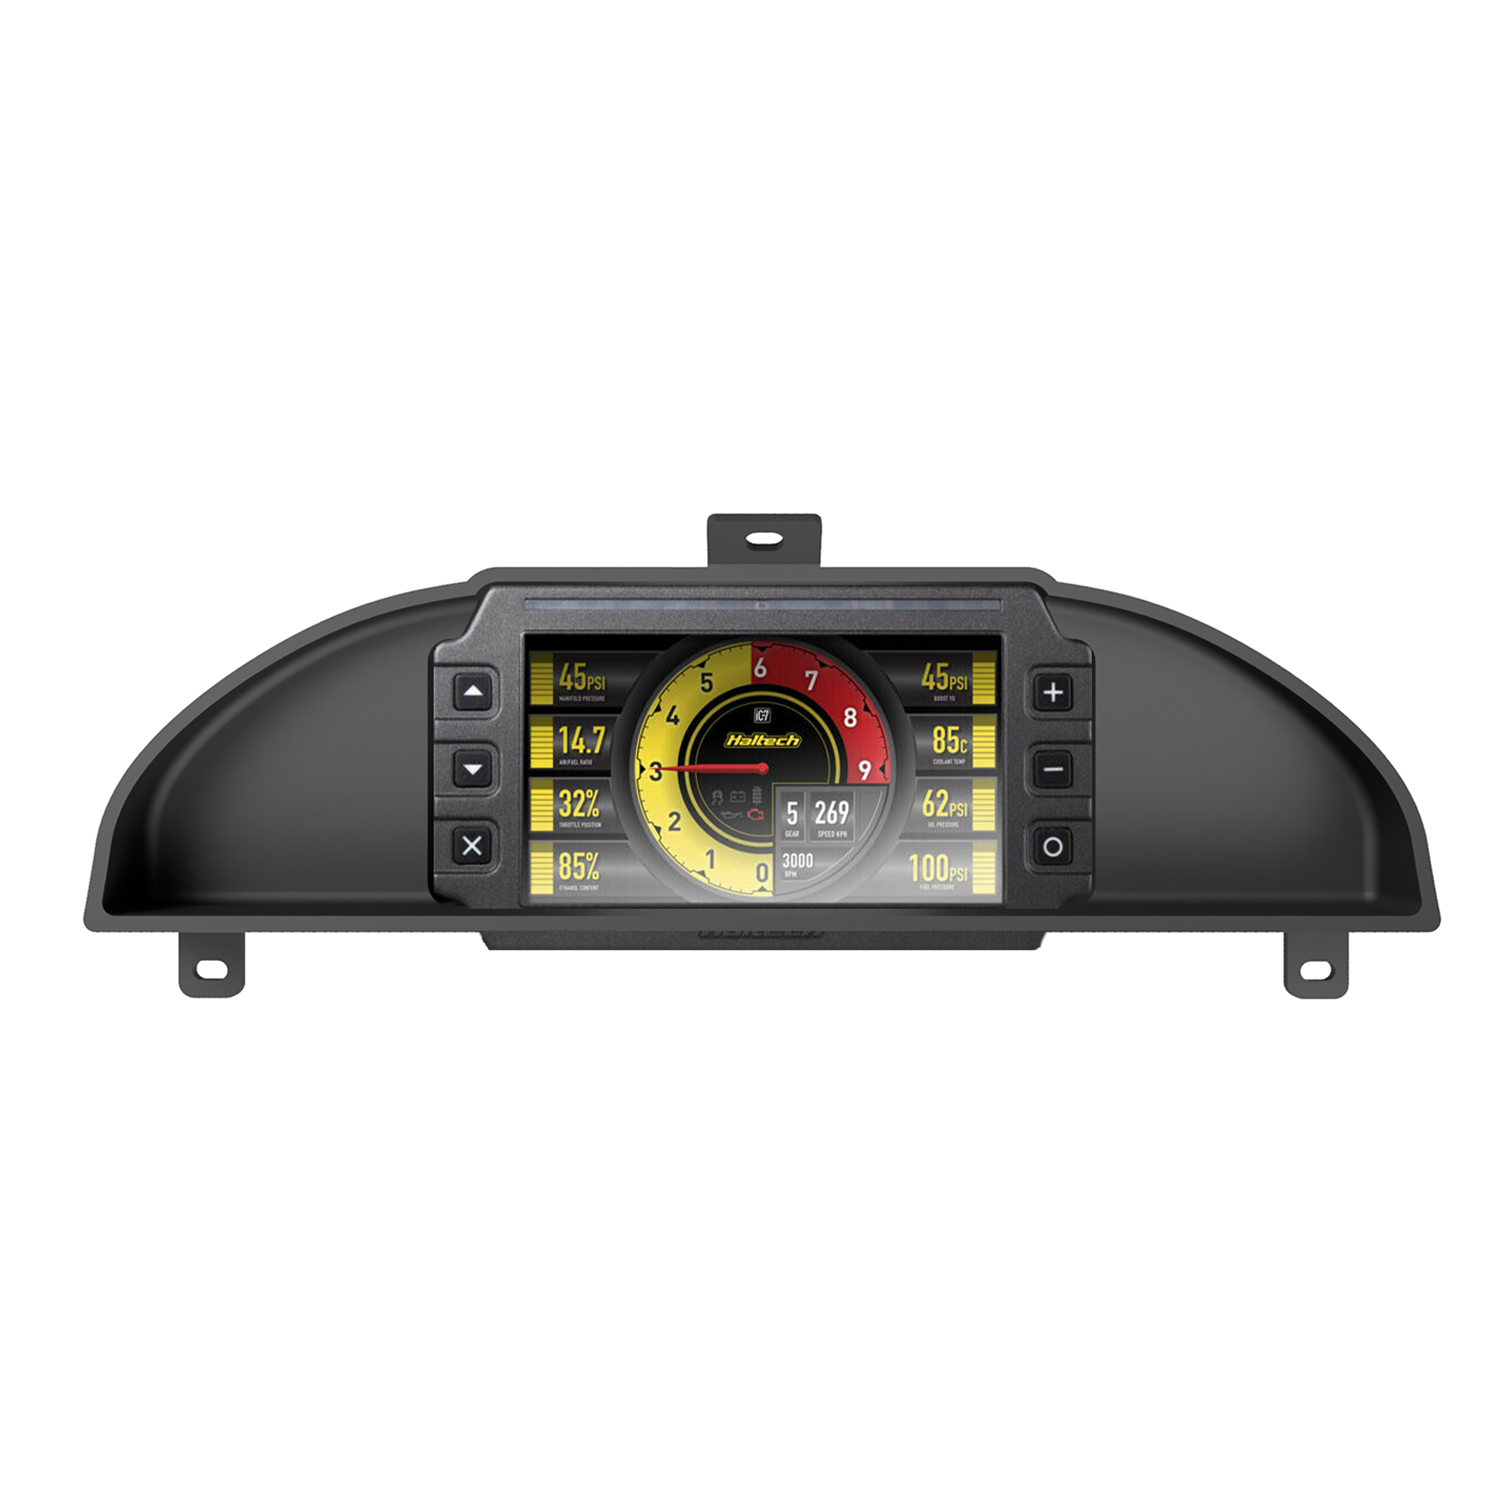 Nissan Silvia S13 180SX/200SX/240SX Dash Mount Recessed for the Haltech iC-7 Display (display not included)